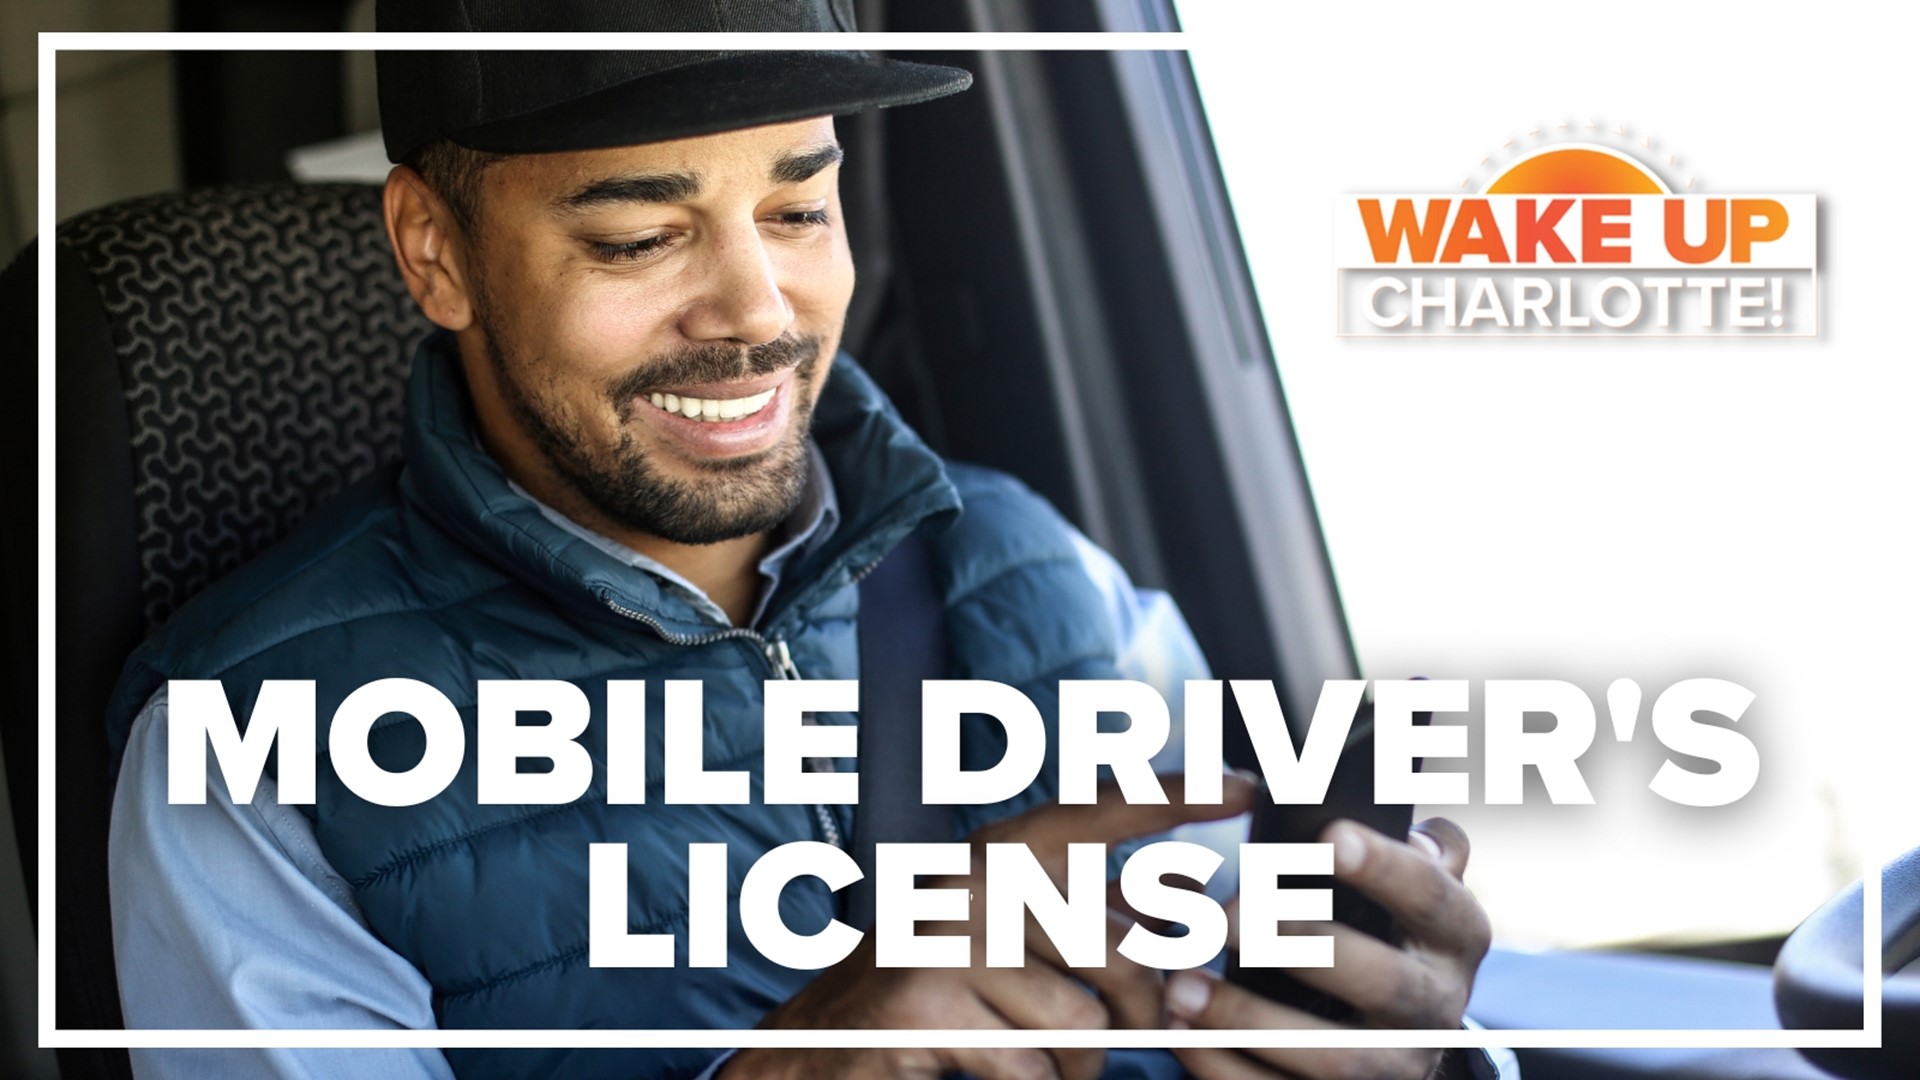 Currently, 12 states offer Mobile Drivers Licenses or they are implementing them as we speak, but what about North Carolina?